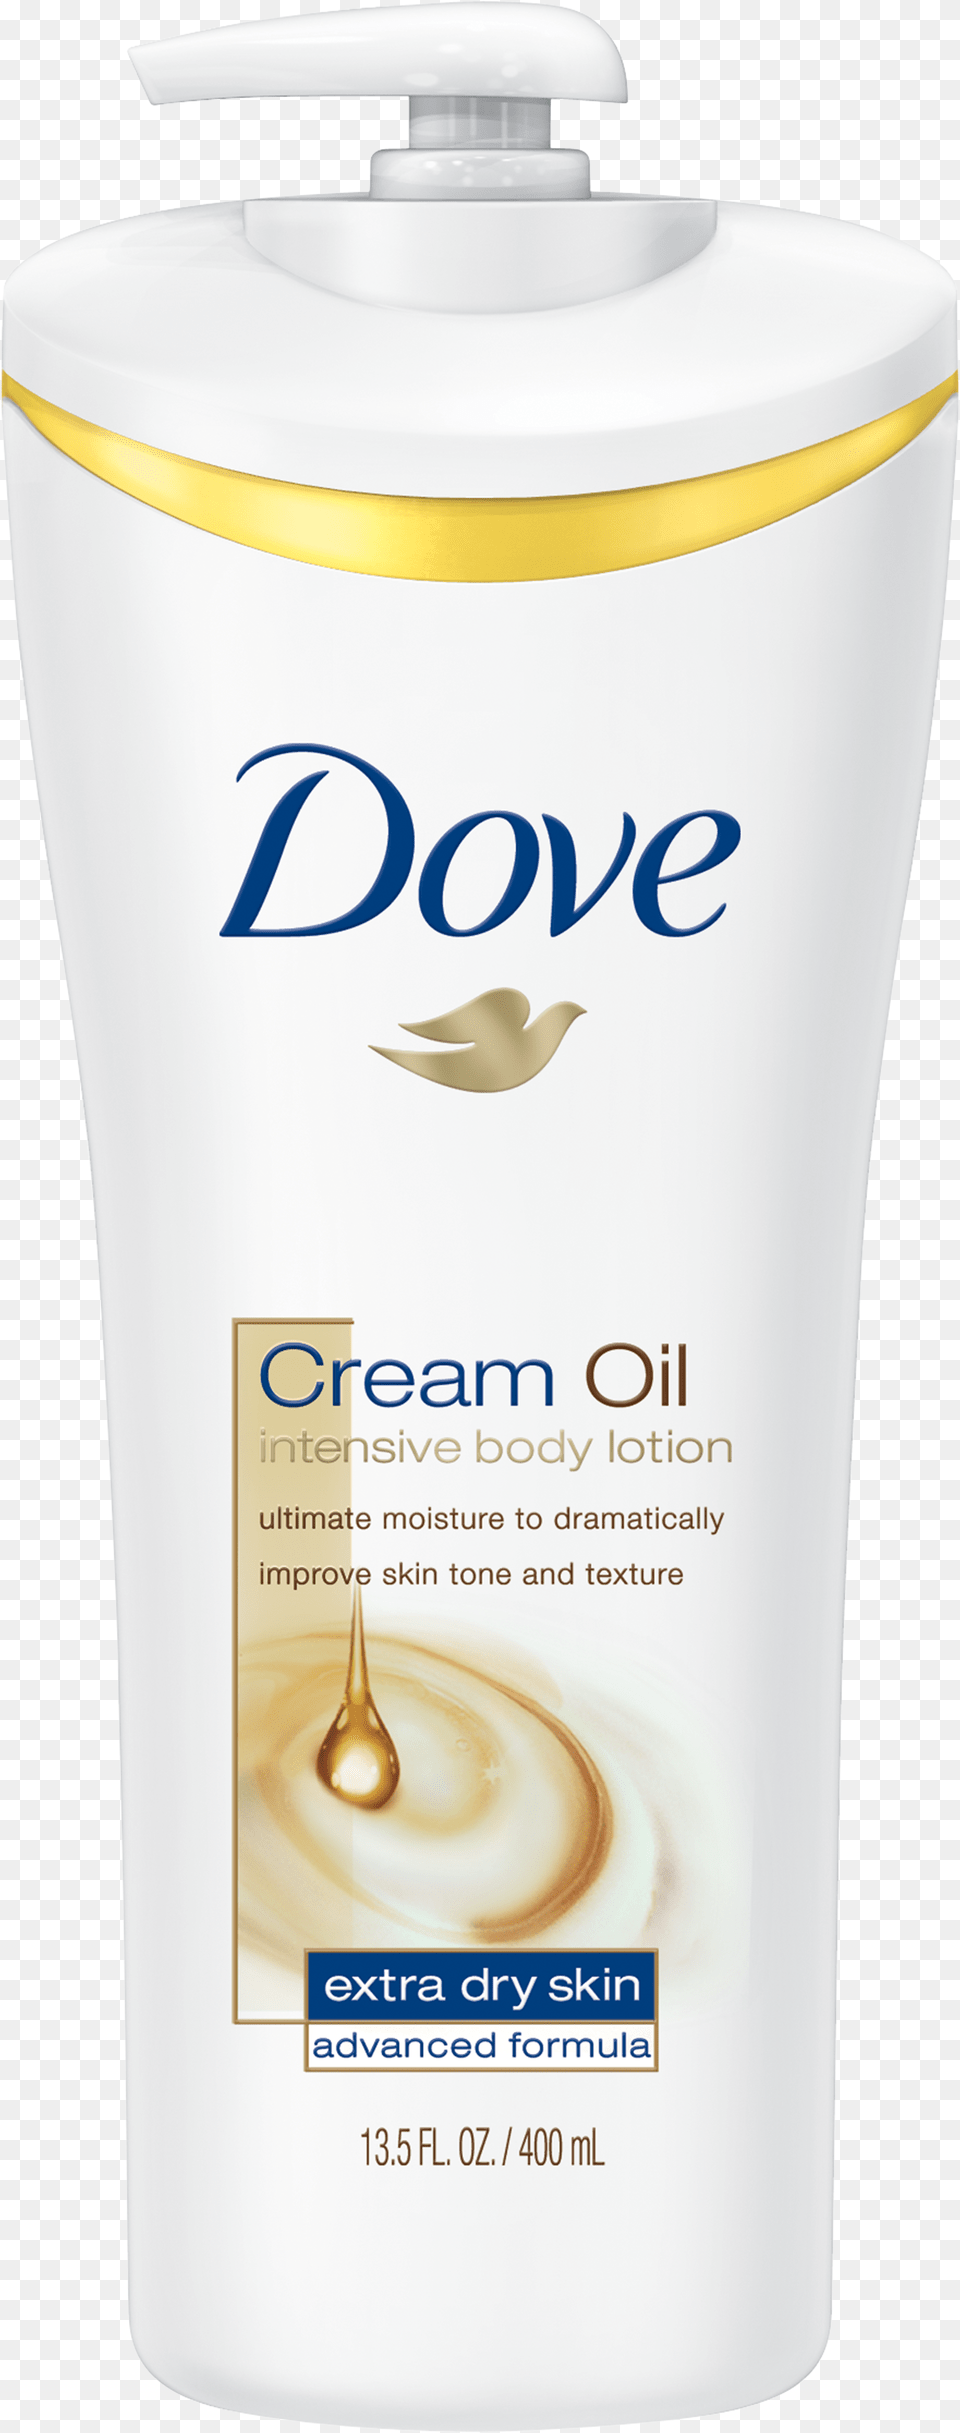 Dove Cream For Oily Skin, Bottle, Lotion, Shaker, Cosmetics Png Image